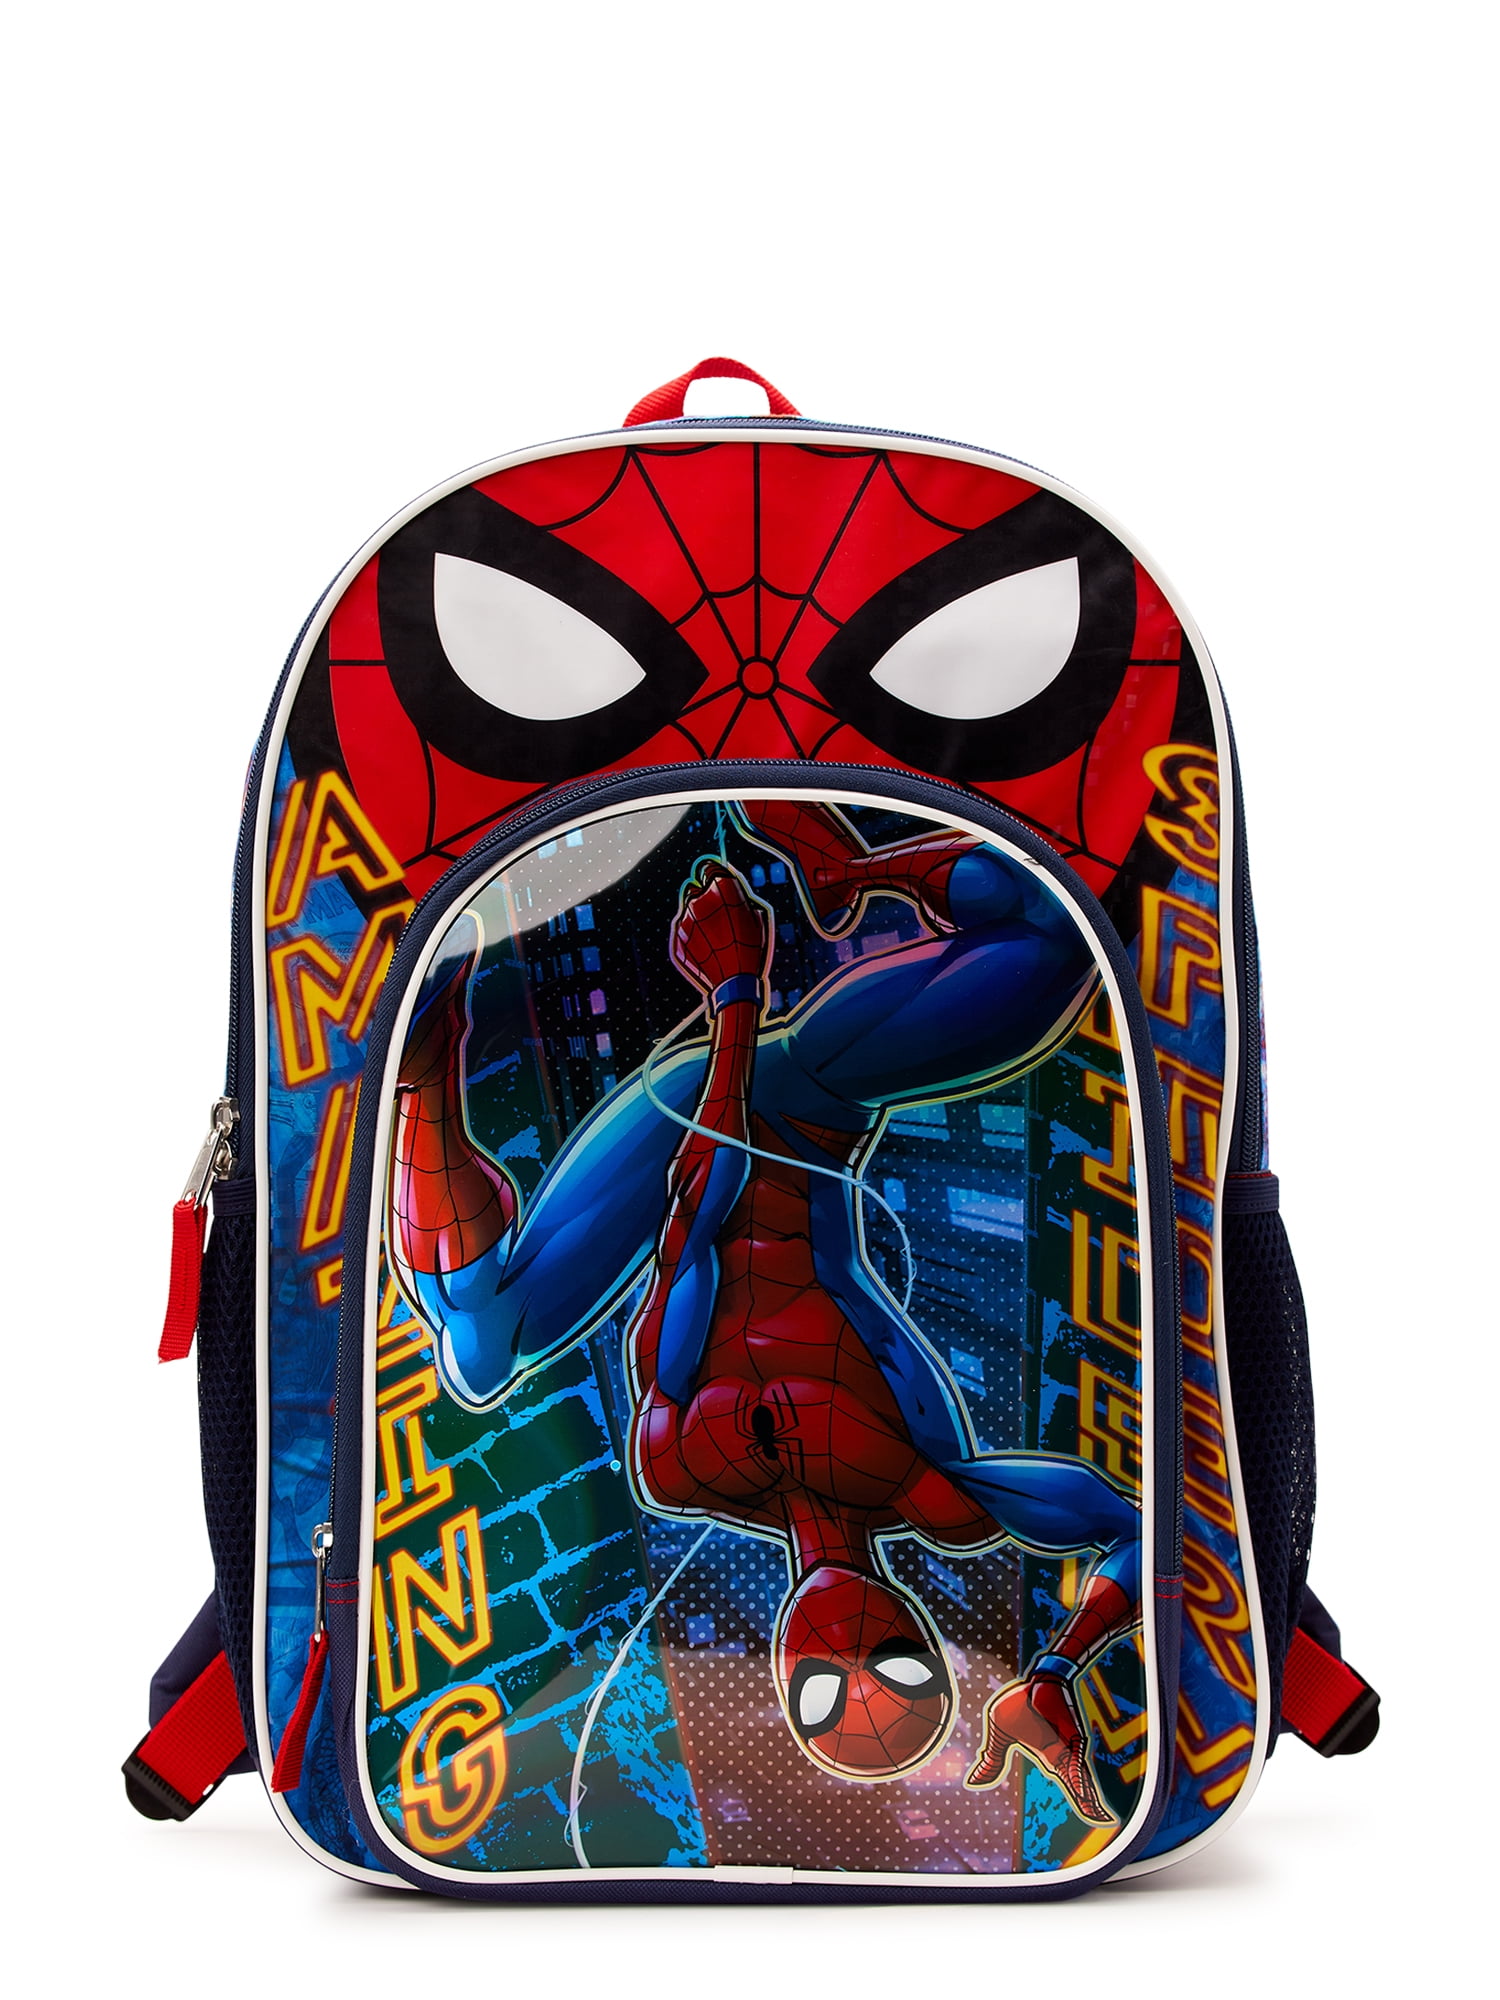 Spider-Man Across the Spider-Verse 3 Pieces Combo 15 inches Backpack –  ILYBAG